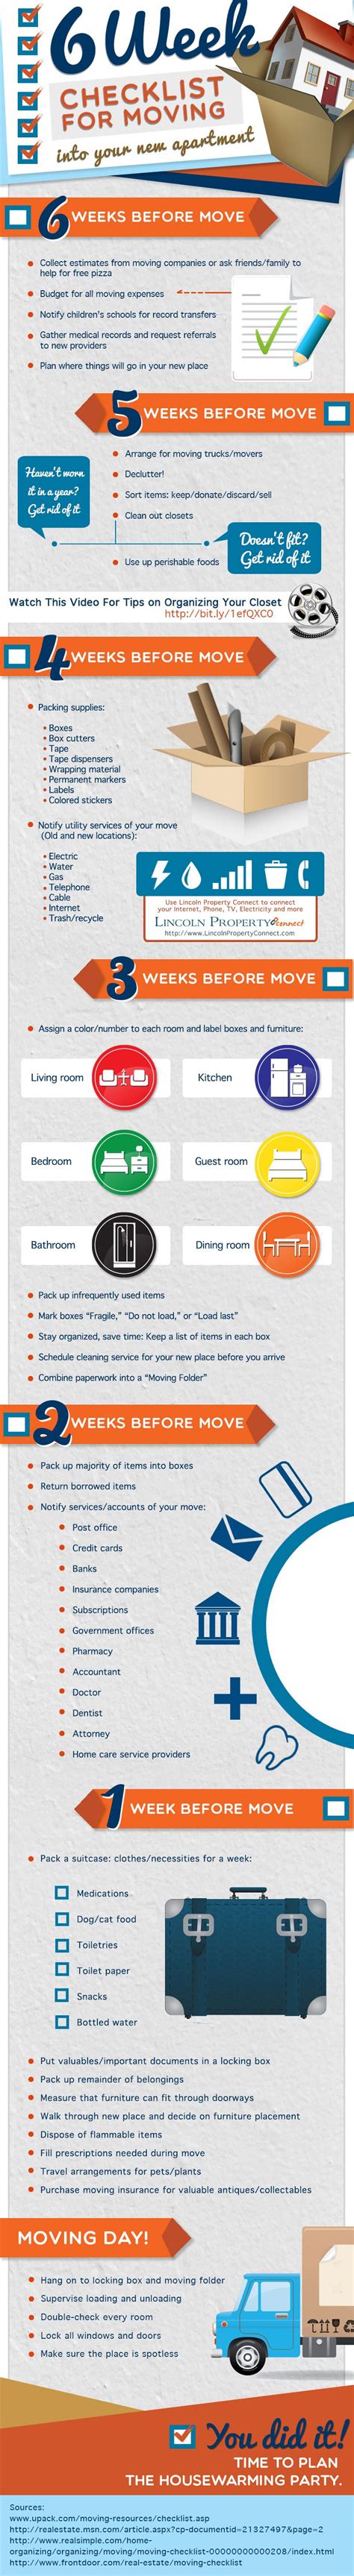 An Awesome Infographic That Shares A Checklist For Moving Into Your New